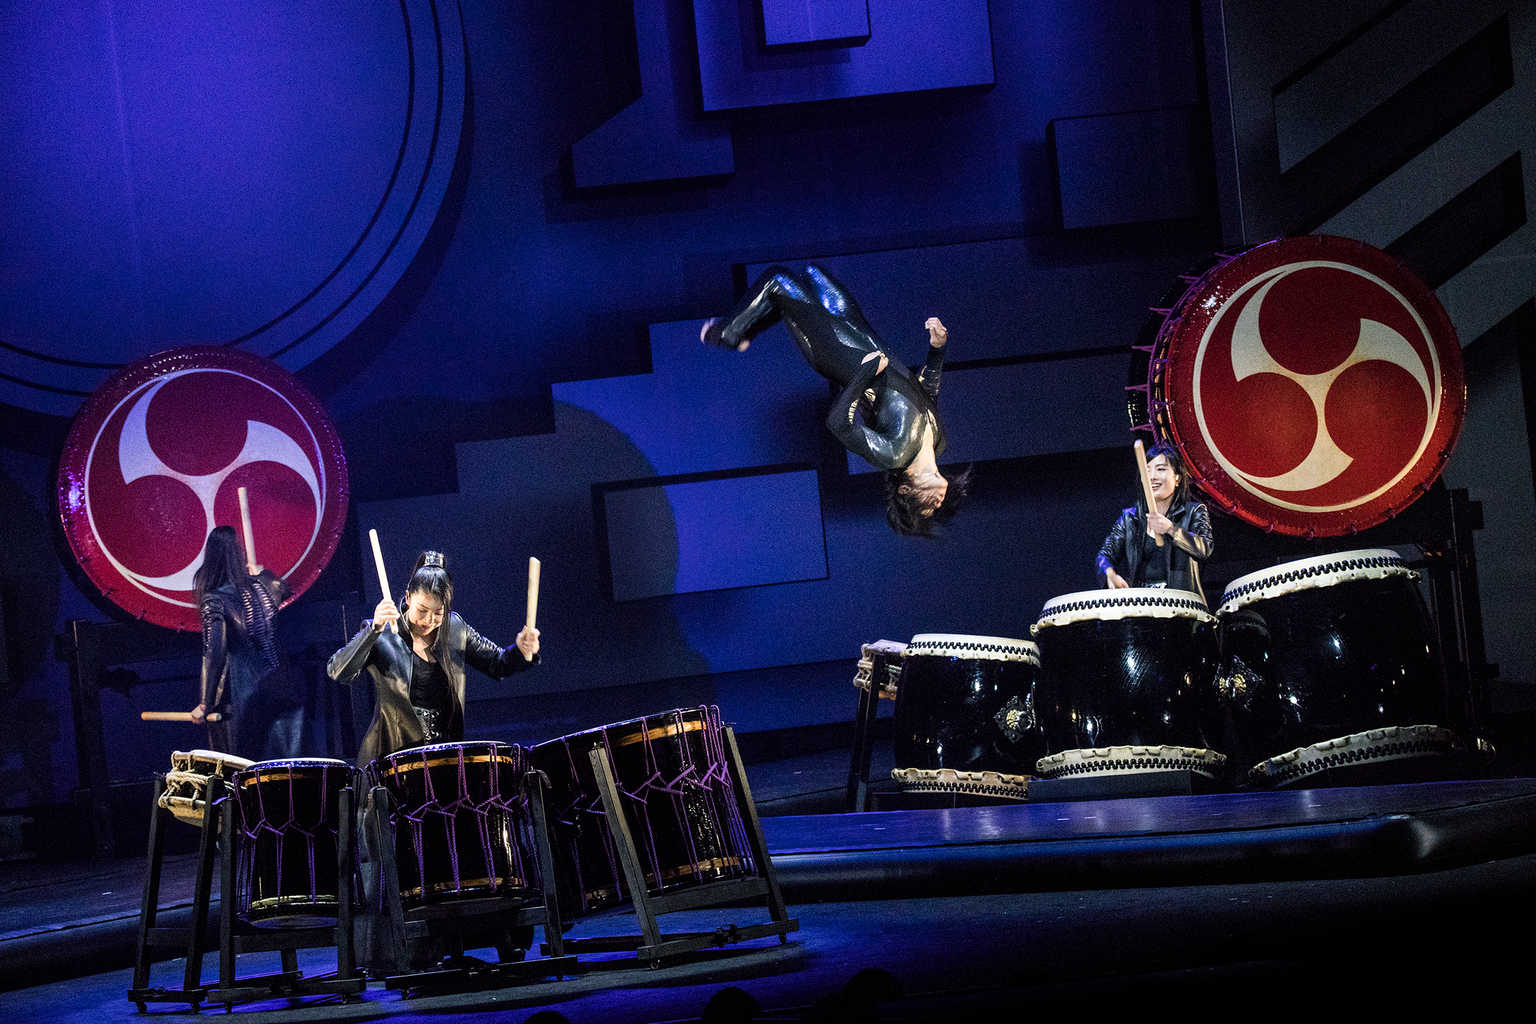 DRUM TAO is known for combining music and dance to reflect Japanese tradition while incorporating other Asian cultural influences.  Breaking past the traditional notions of taiko, DRUM TAO continues to create an entirely new art form that is modern yet retains sense of tradition.